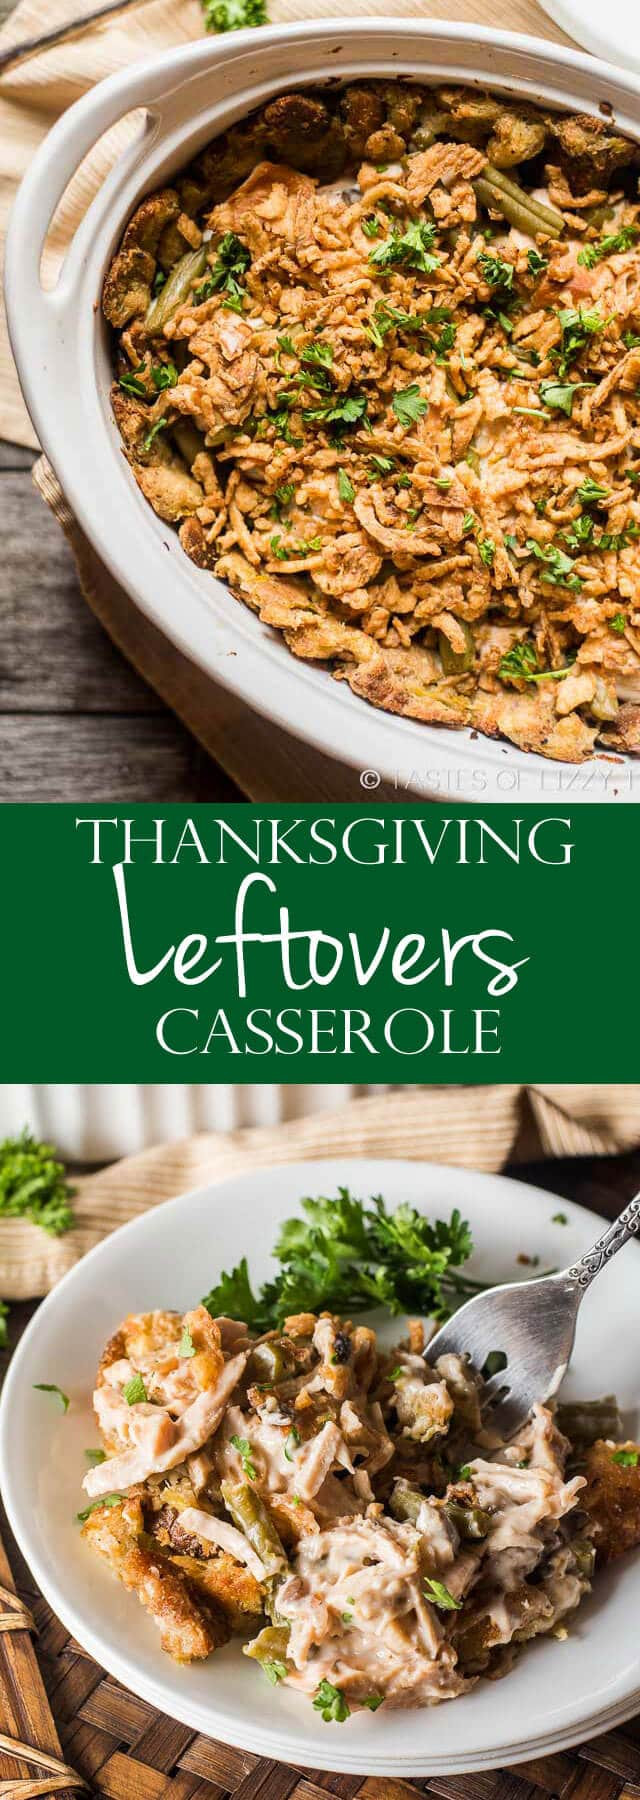 Leftovers Thanksgiving Casserole
 Turkey and Stuffing Casserole Recipe using Thanksgiving